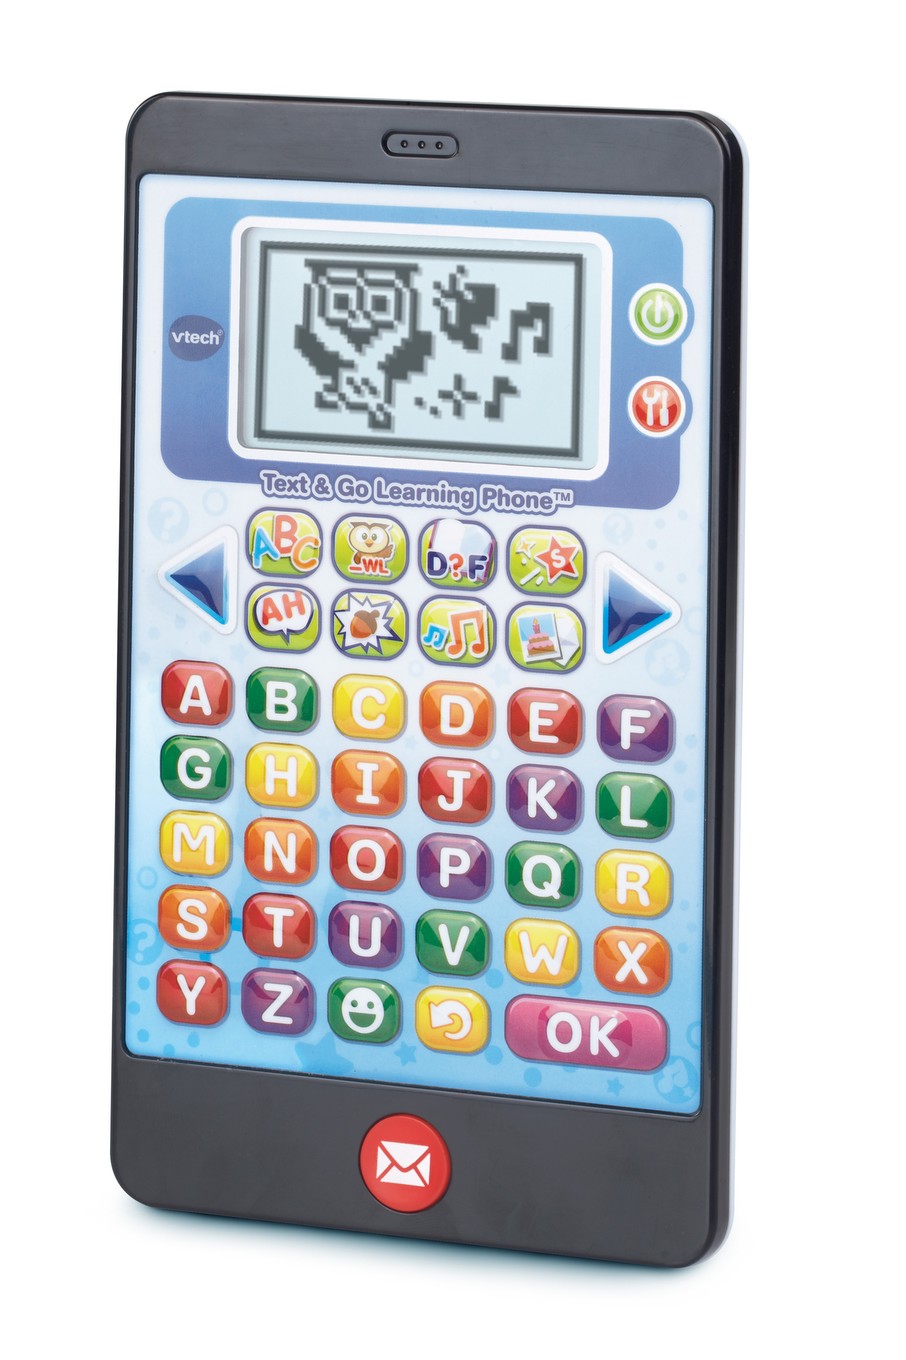 Vtech phone how to get messages